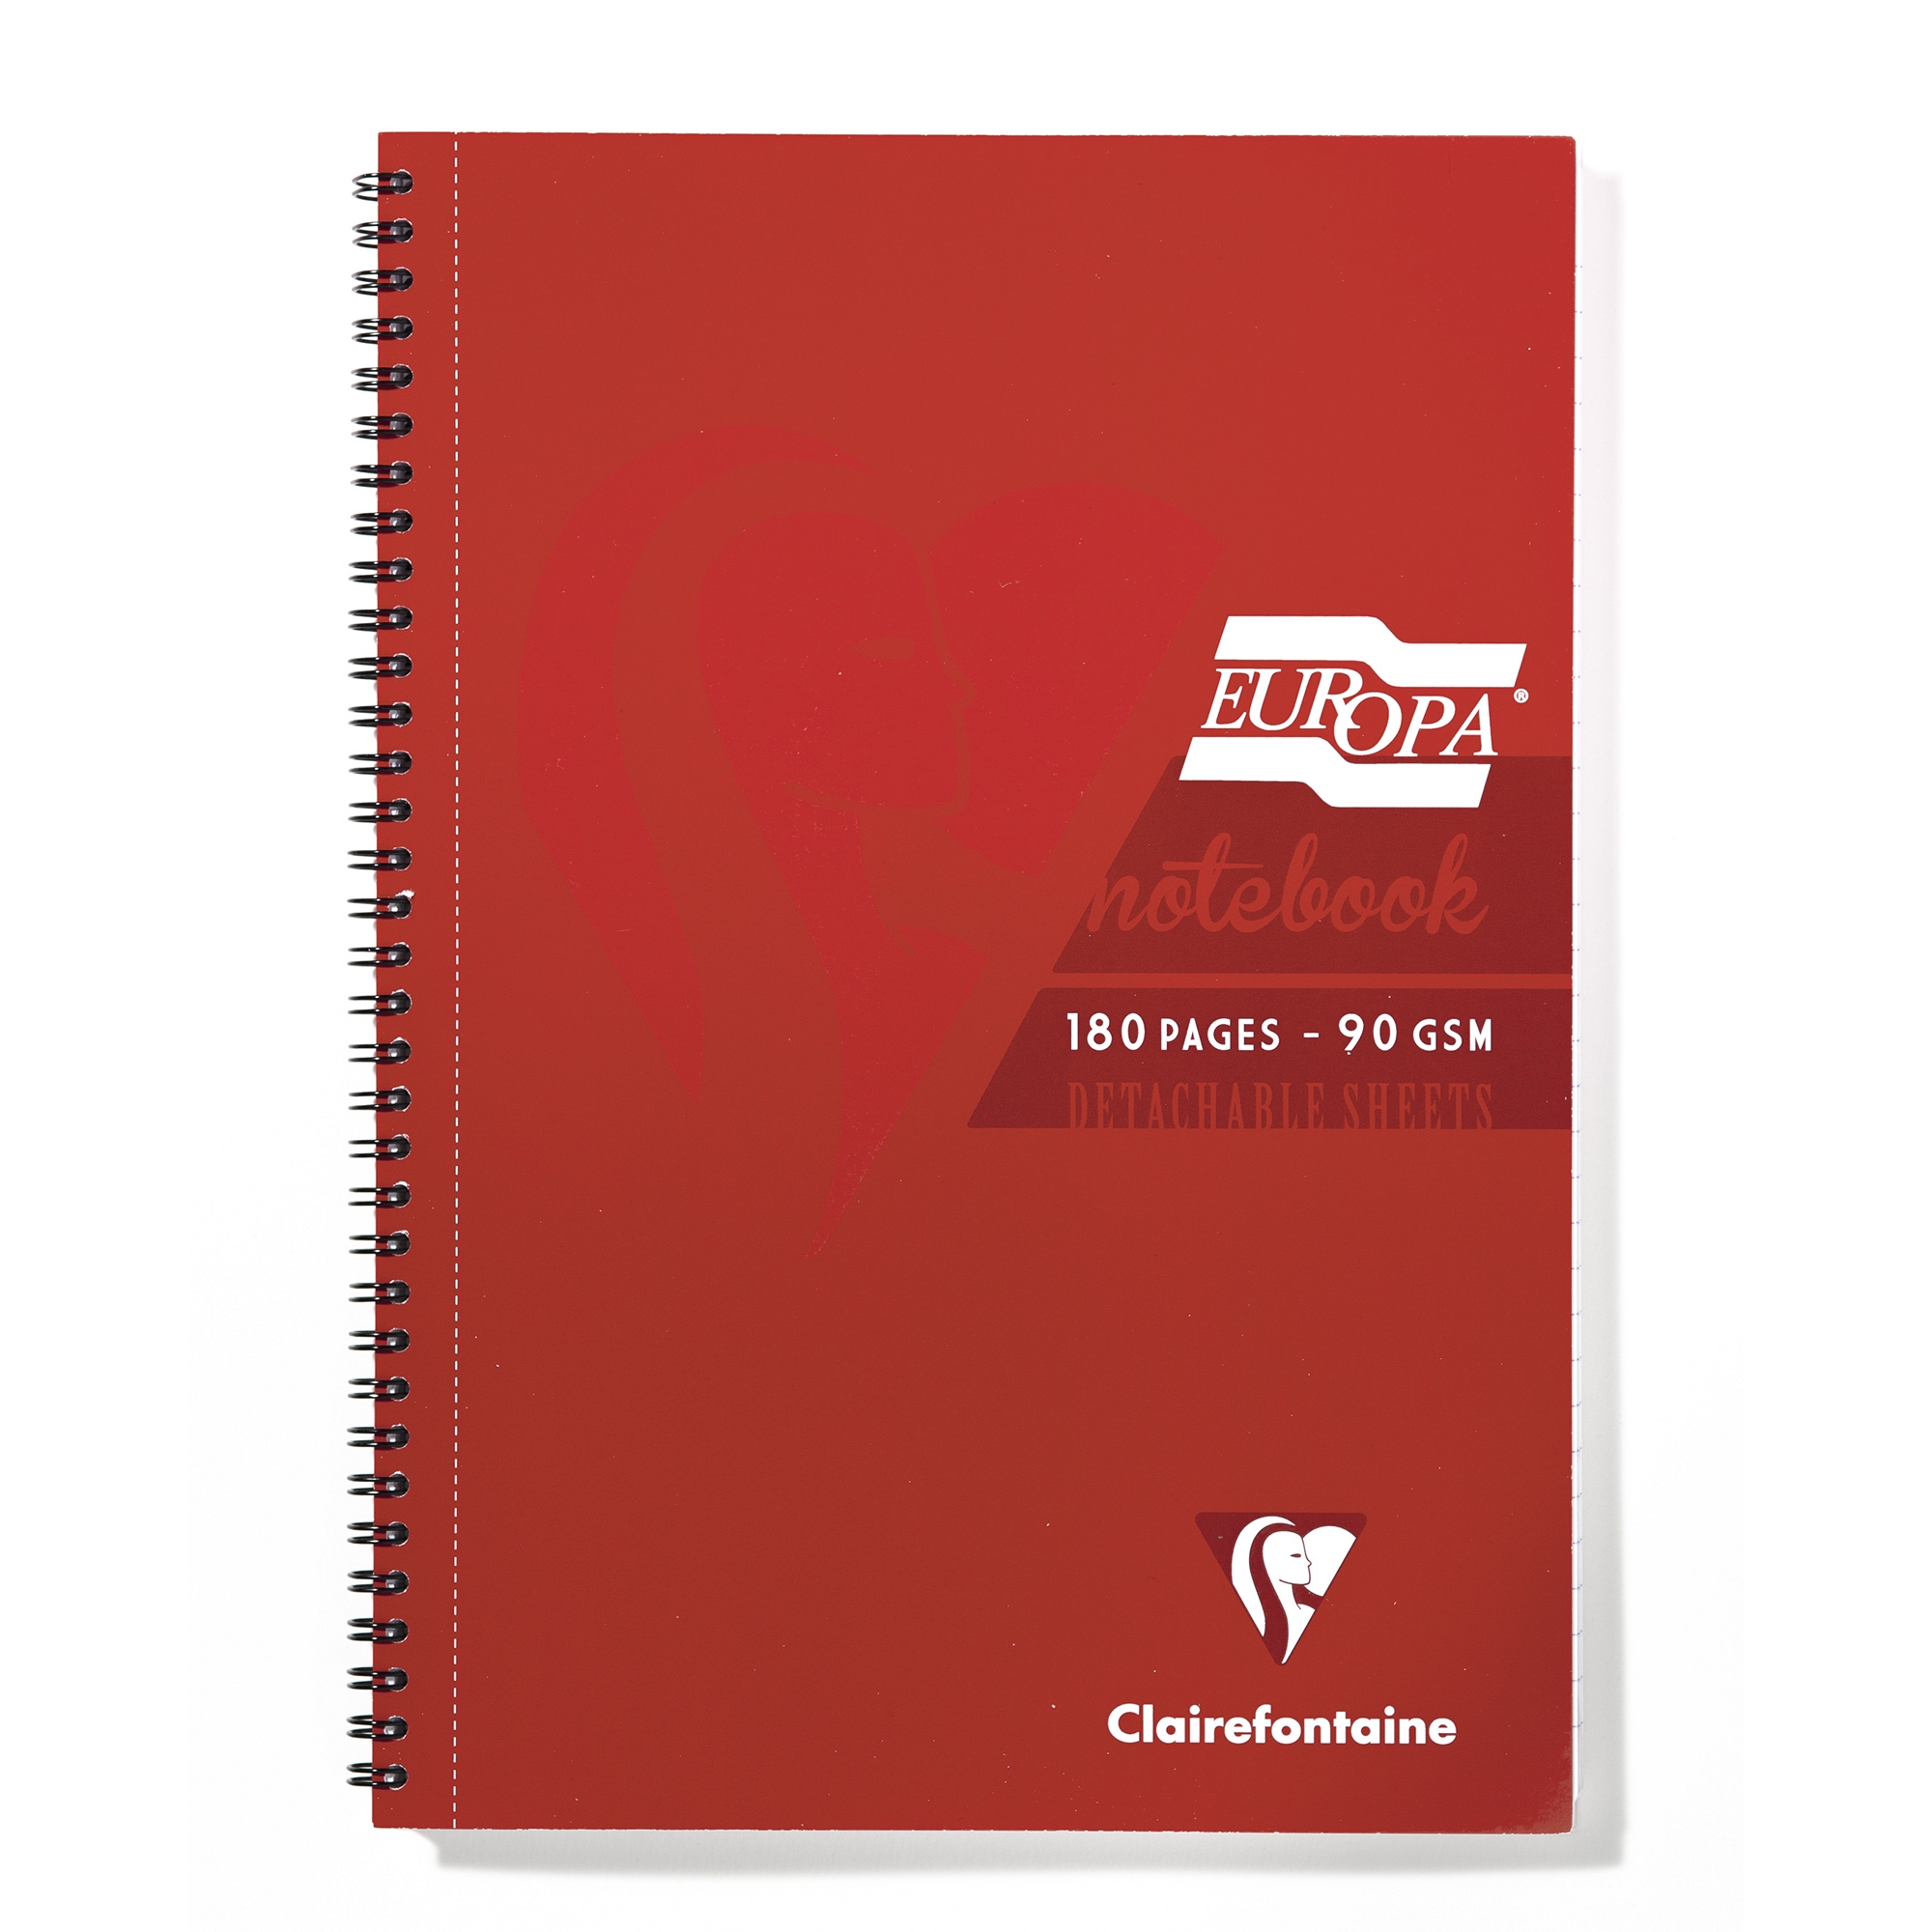 NEW Europa Note Book  - A4 Red